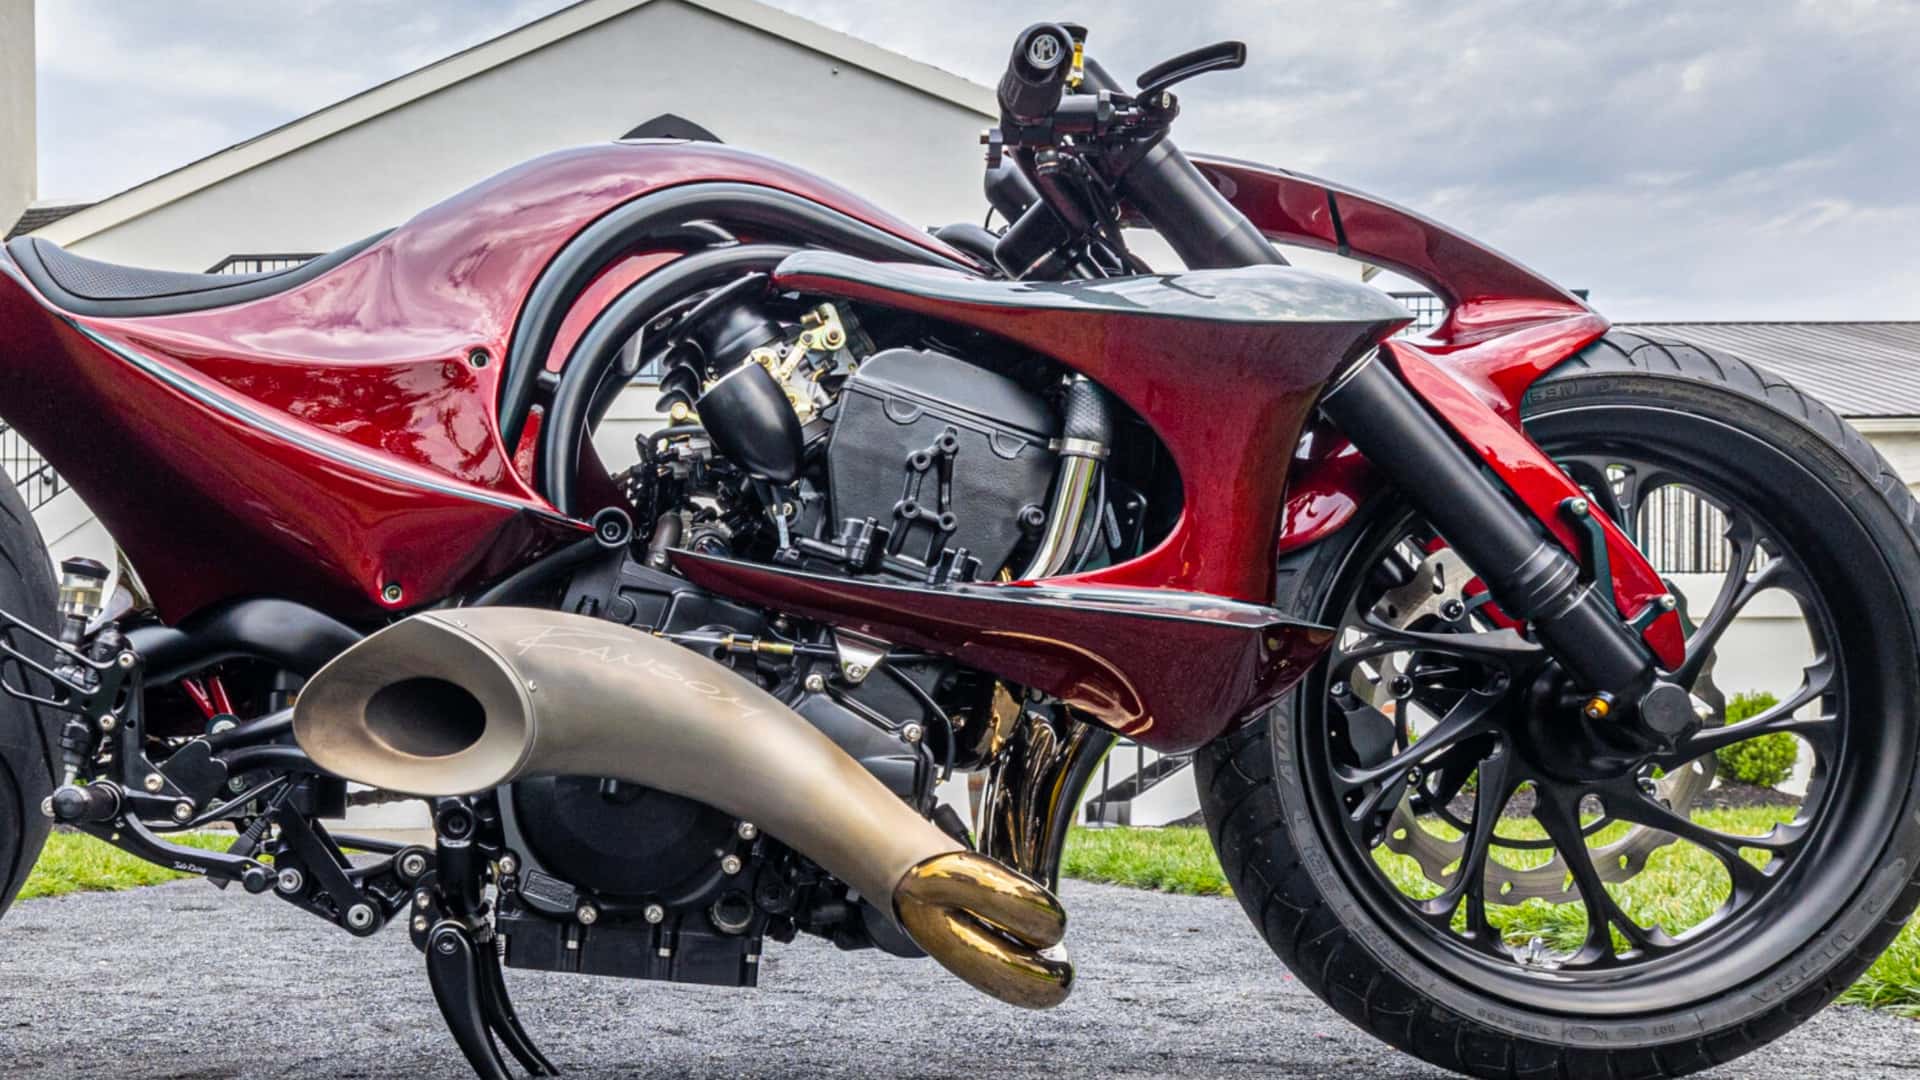 Ransom Motorcycles' Archangel Unique Design and Performance